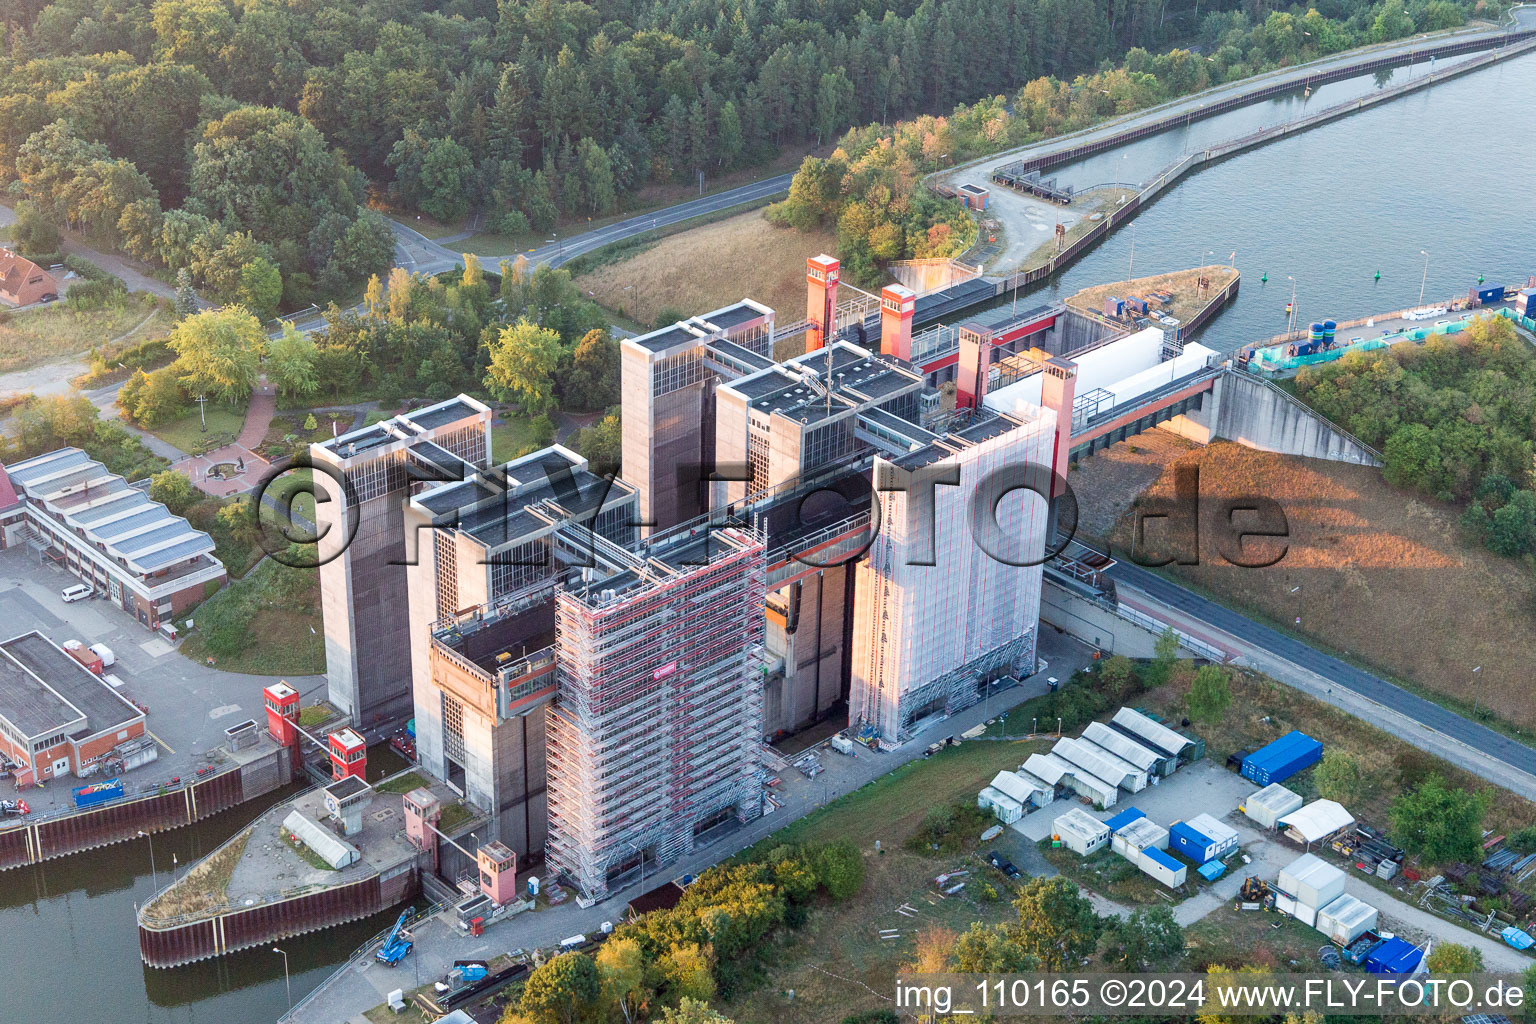 Bird's eye view of Boat lift and locks plants on the banks of the waterway of the Elbe side channel in Scharnebeck in the state Lower Saxony, Germany